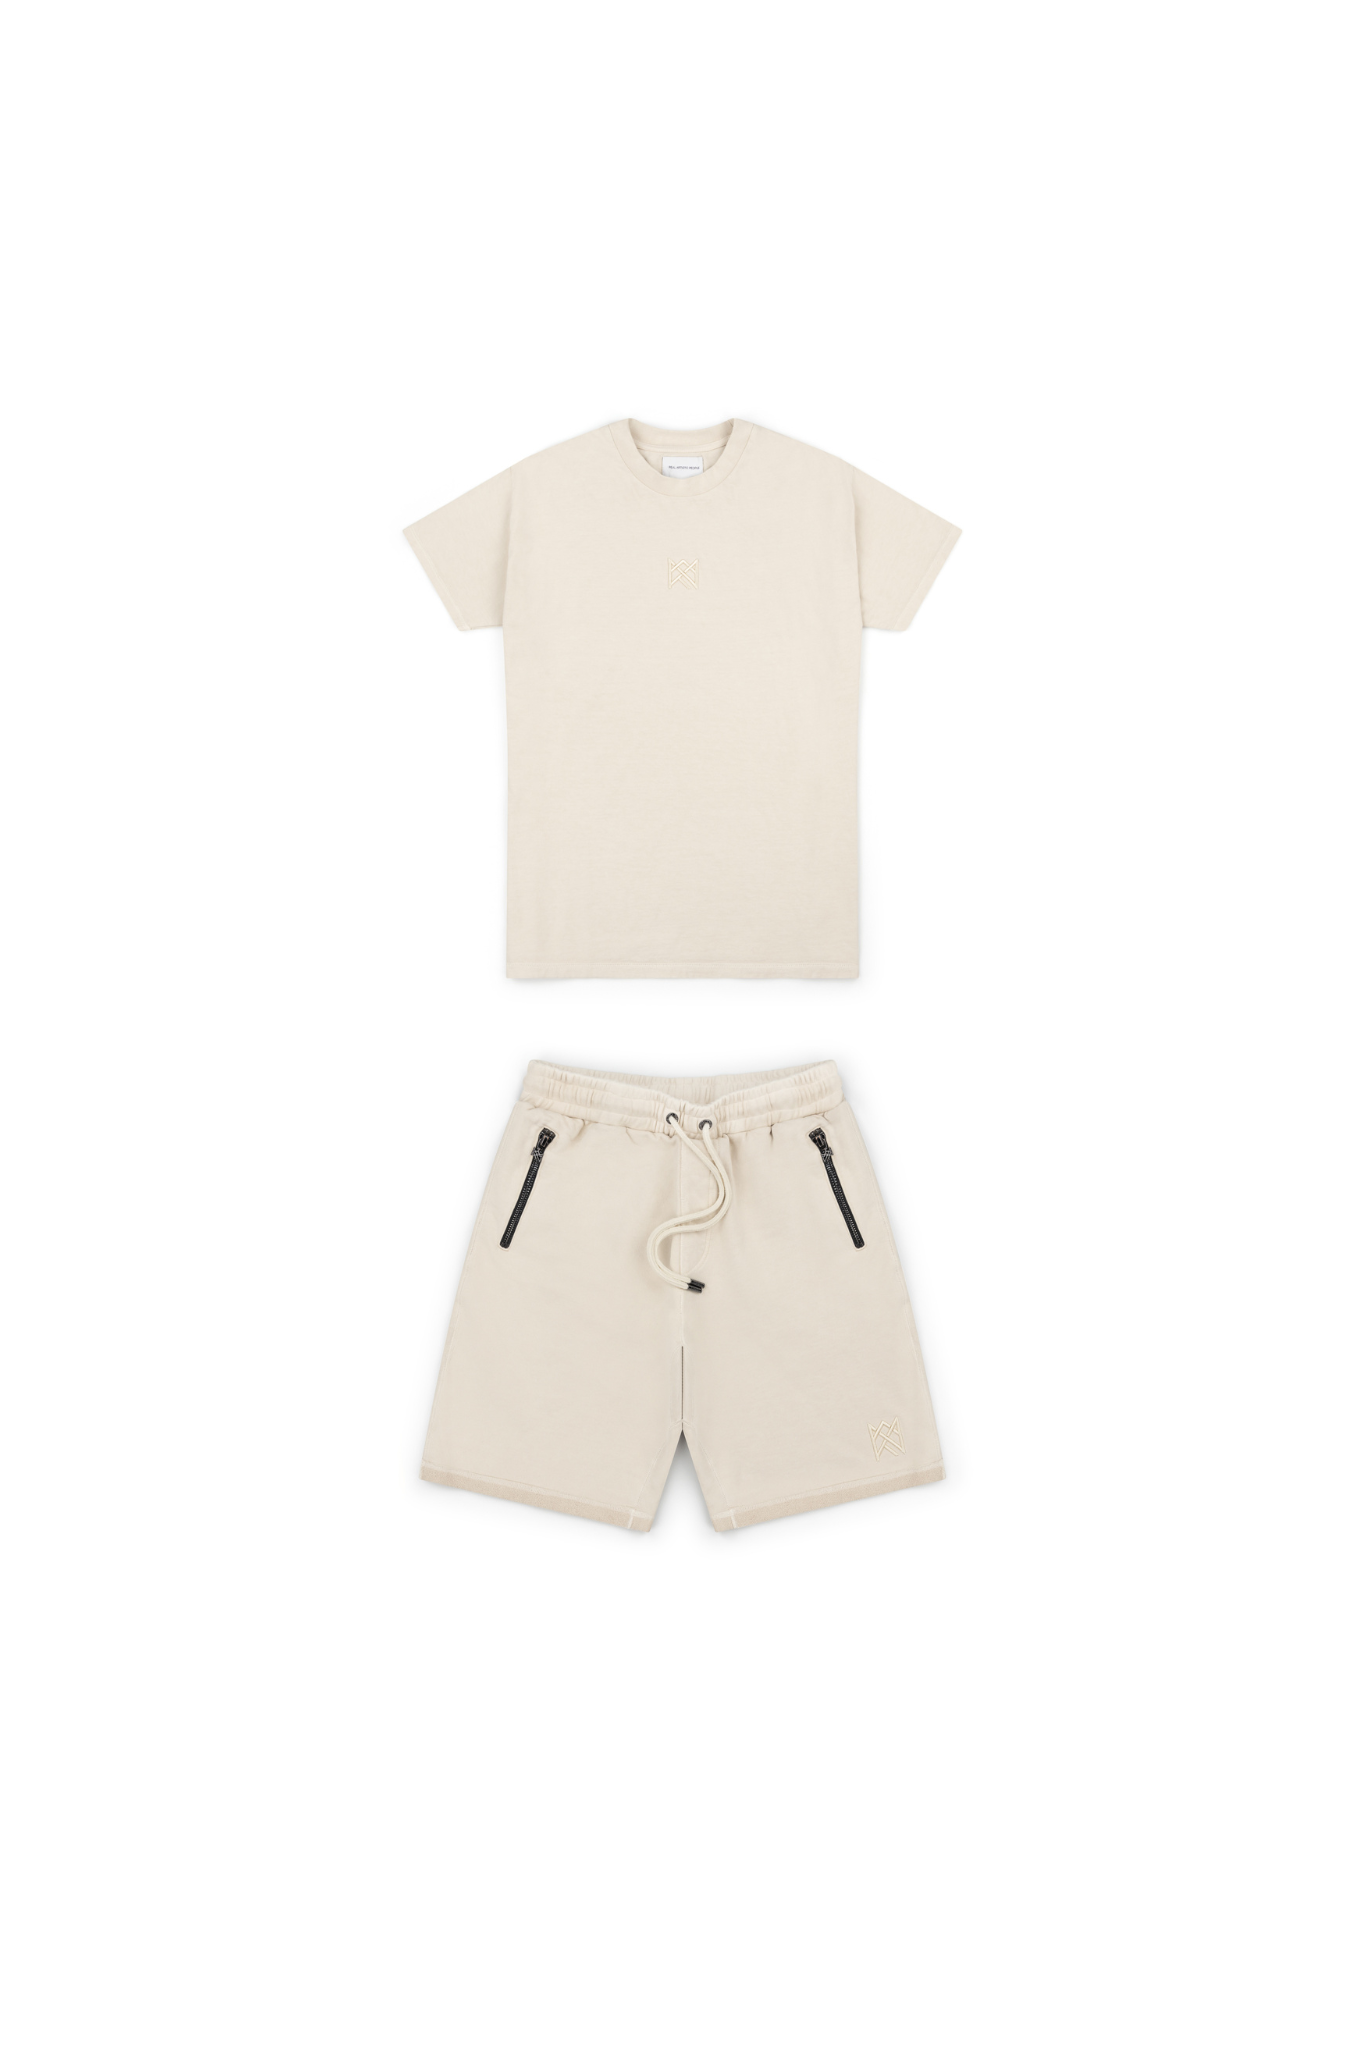 Real Artistic People - Heir Tee and Shorts Twin Set Vintage Off White